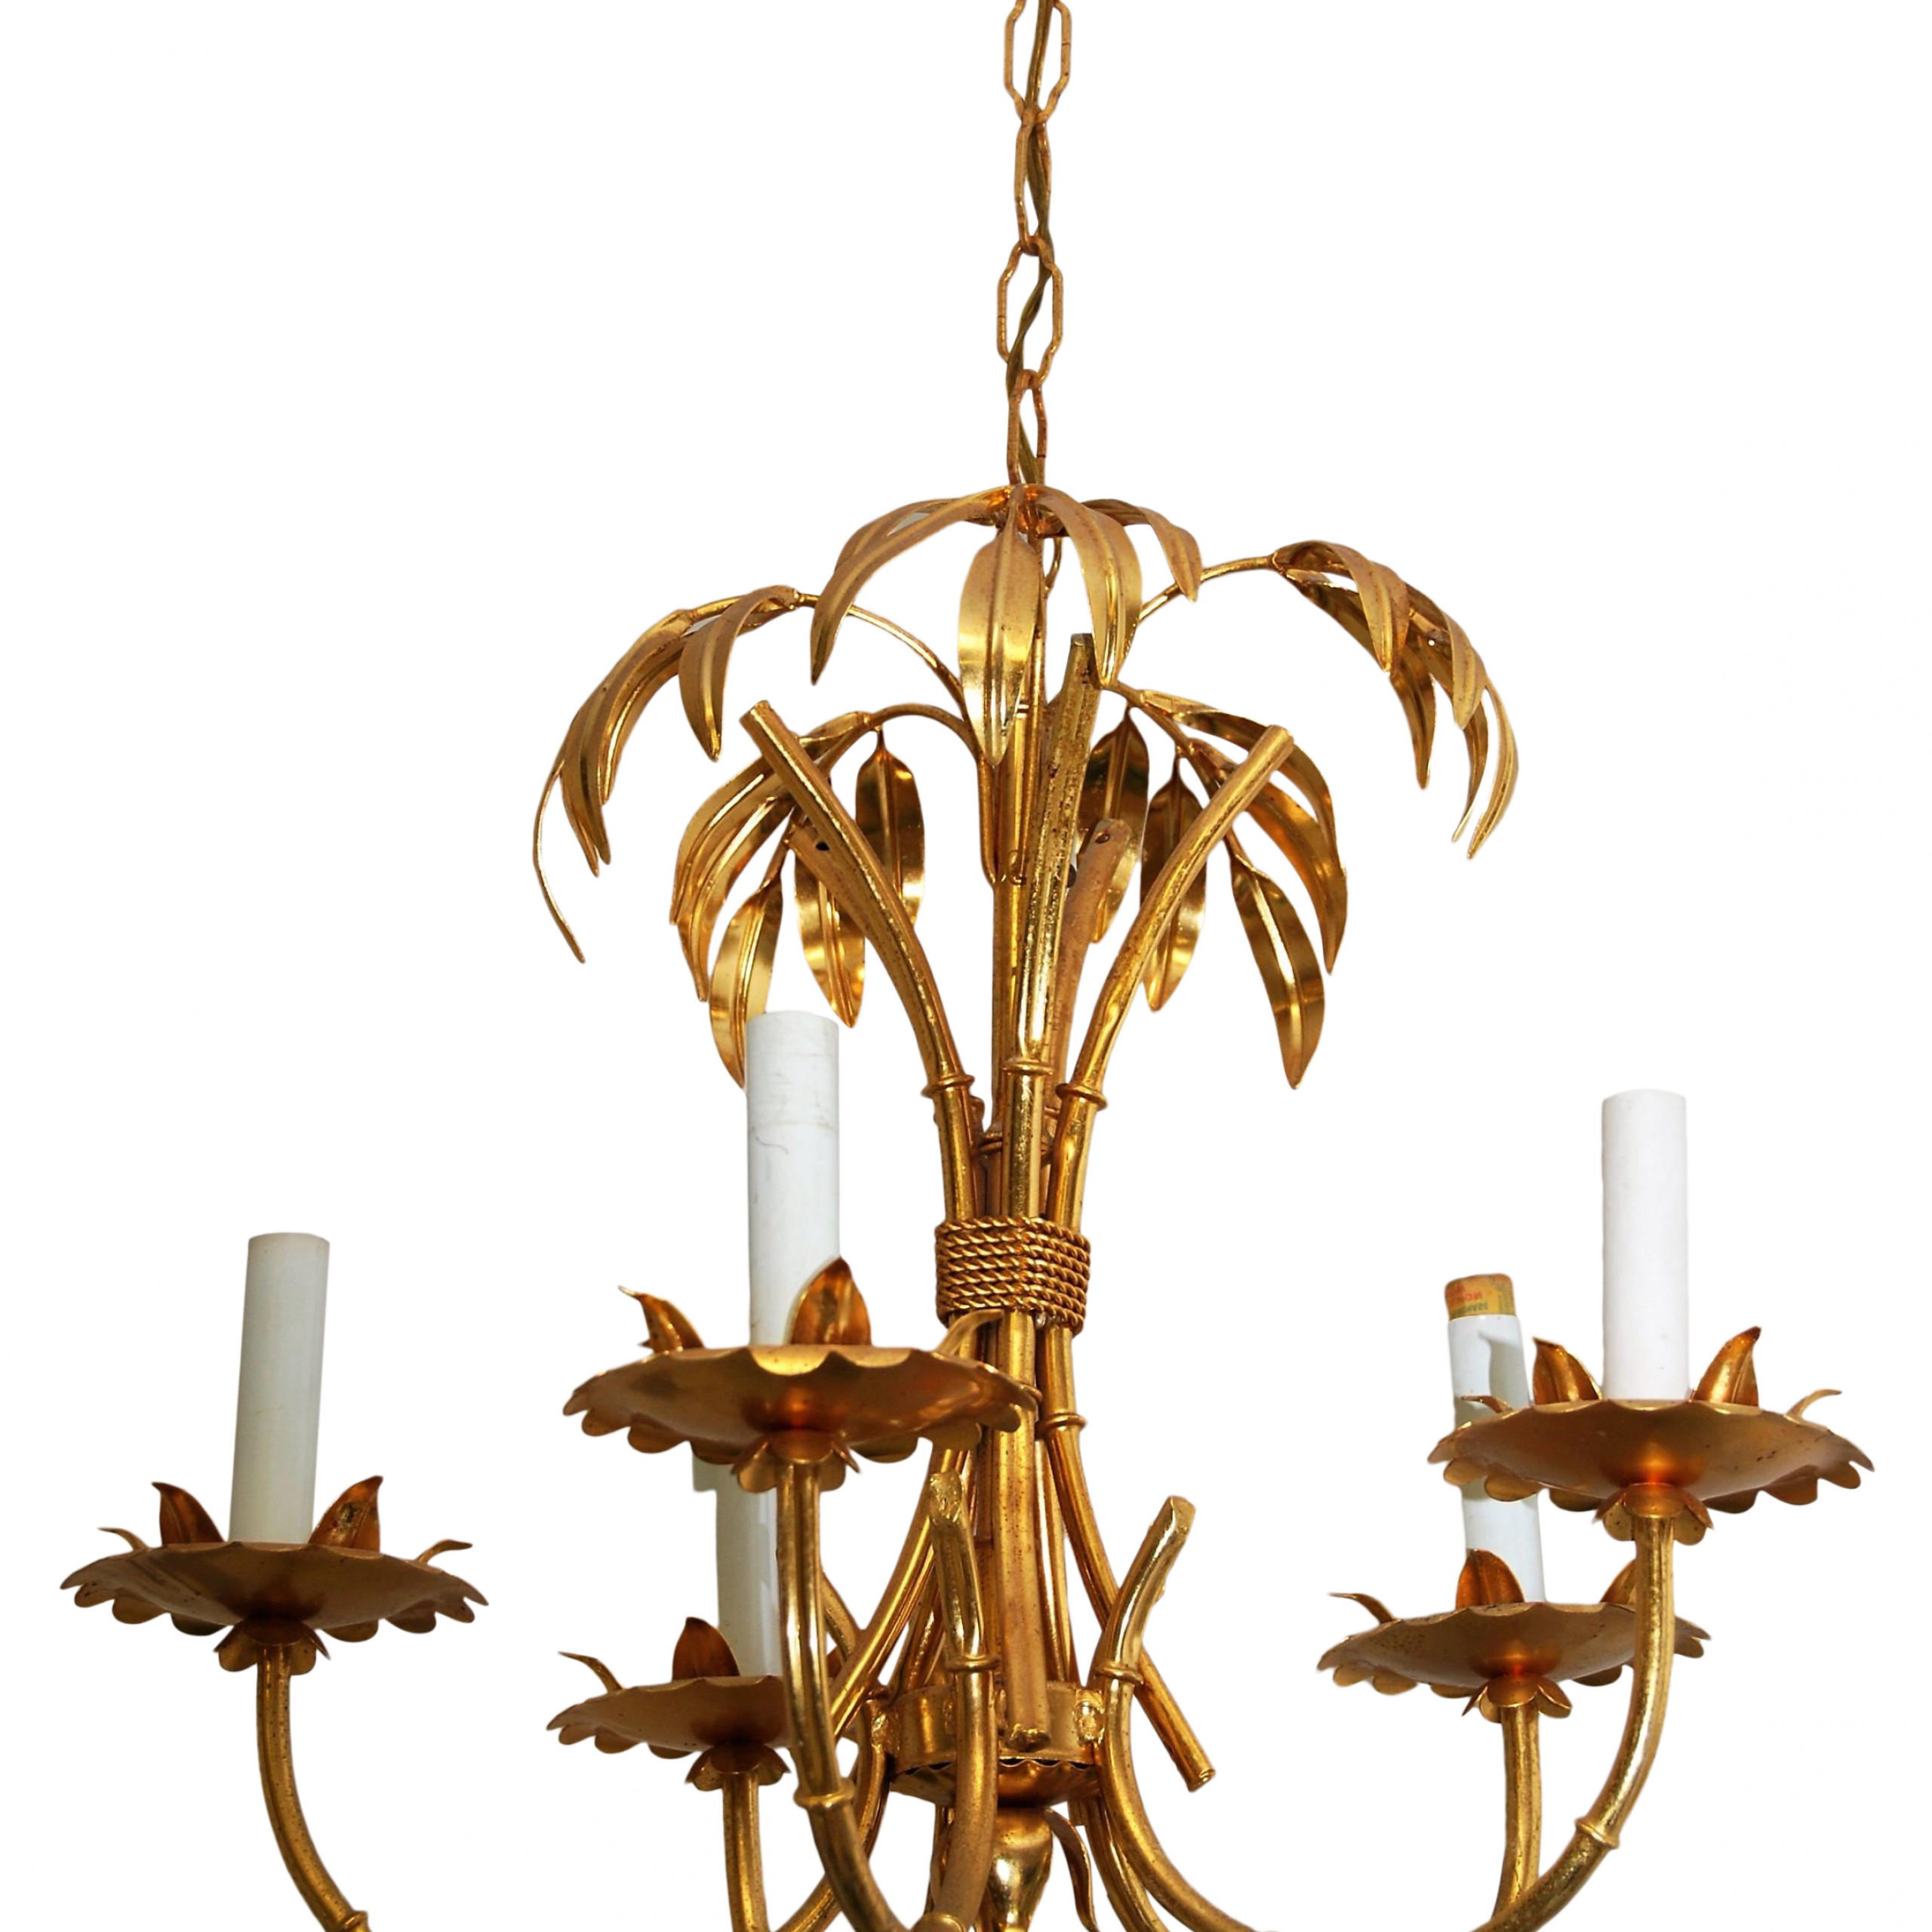 Silver Leaf Chandeliers Throughout Well Known Gold Leaf Vintage Palm Chandelier (View 2 of 20)